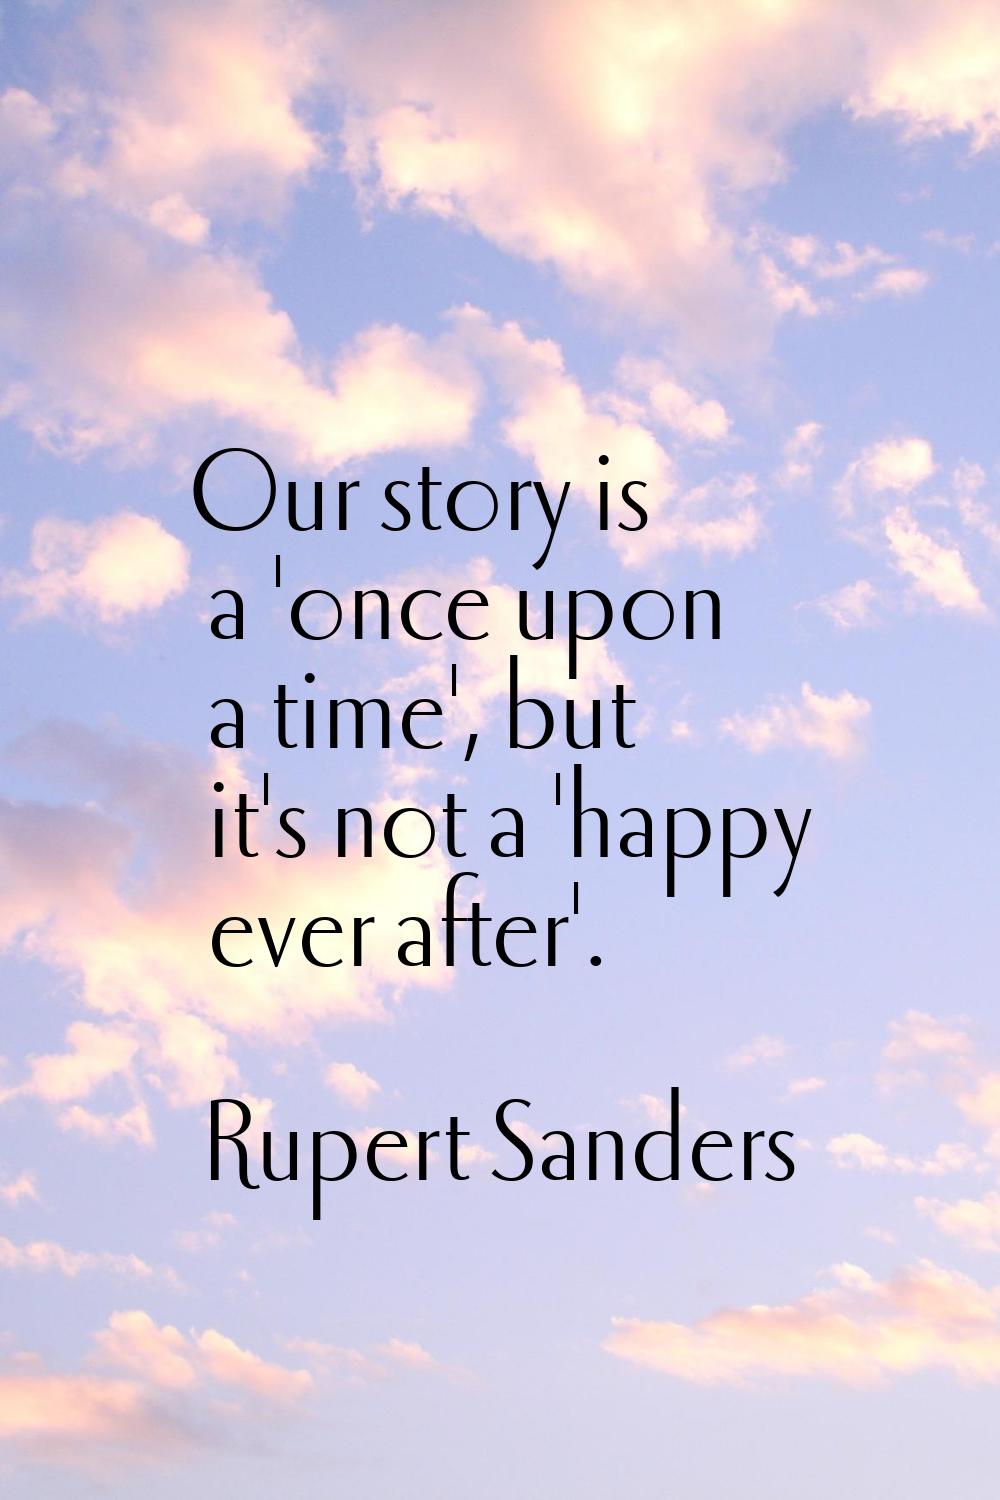 Our story is a 'once upon a time', but it's not a 'happy ever after'.